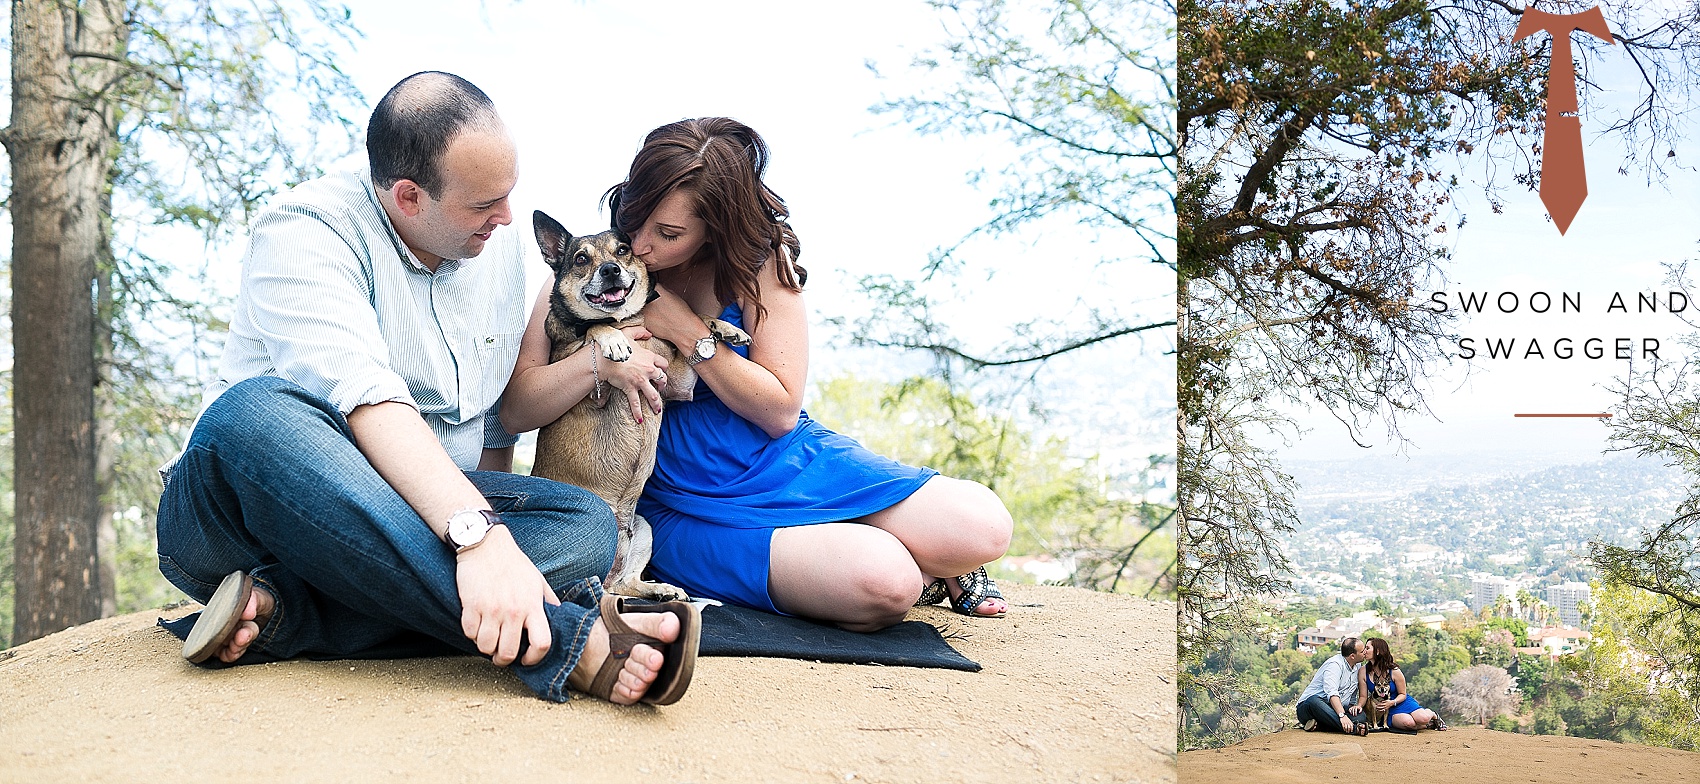 los angeles griffith observatory engagement session photos (6)